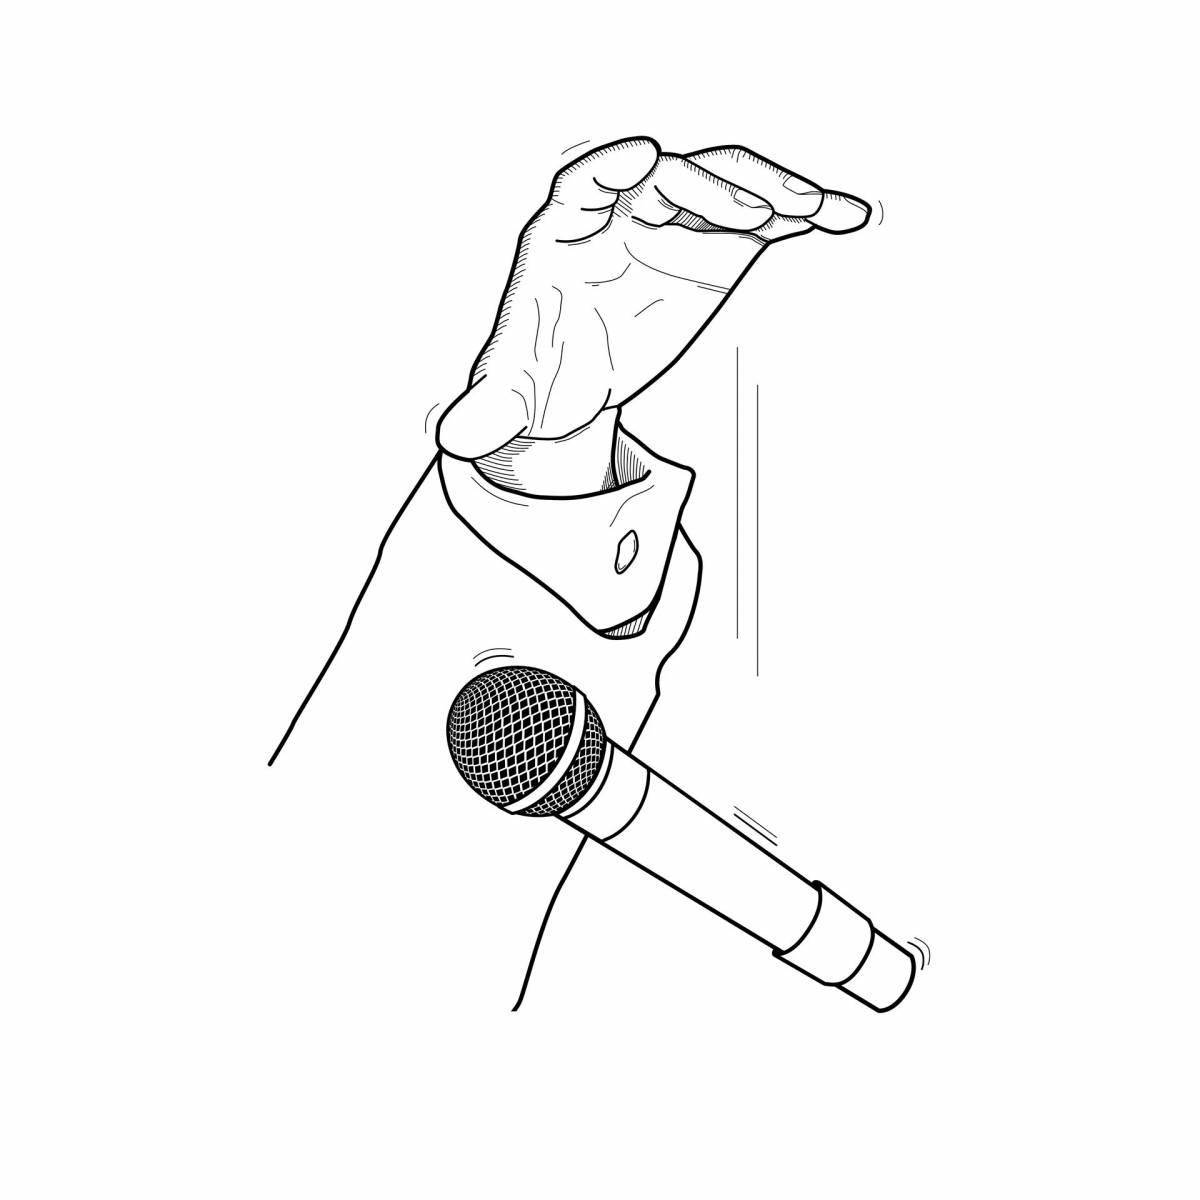 Animated standup 2 coloring page